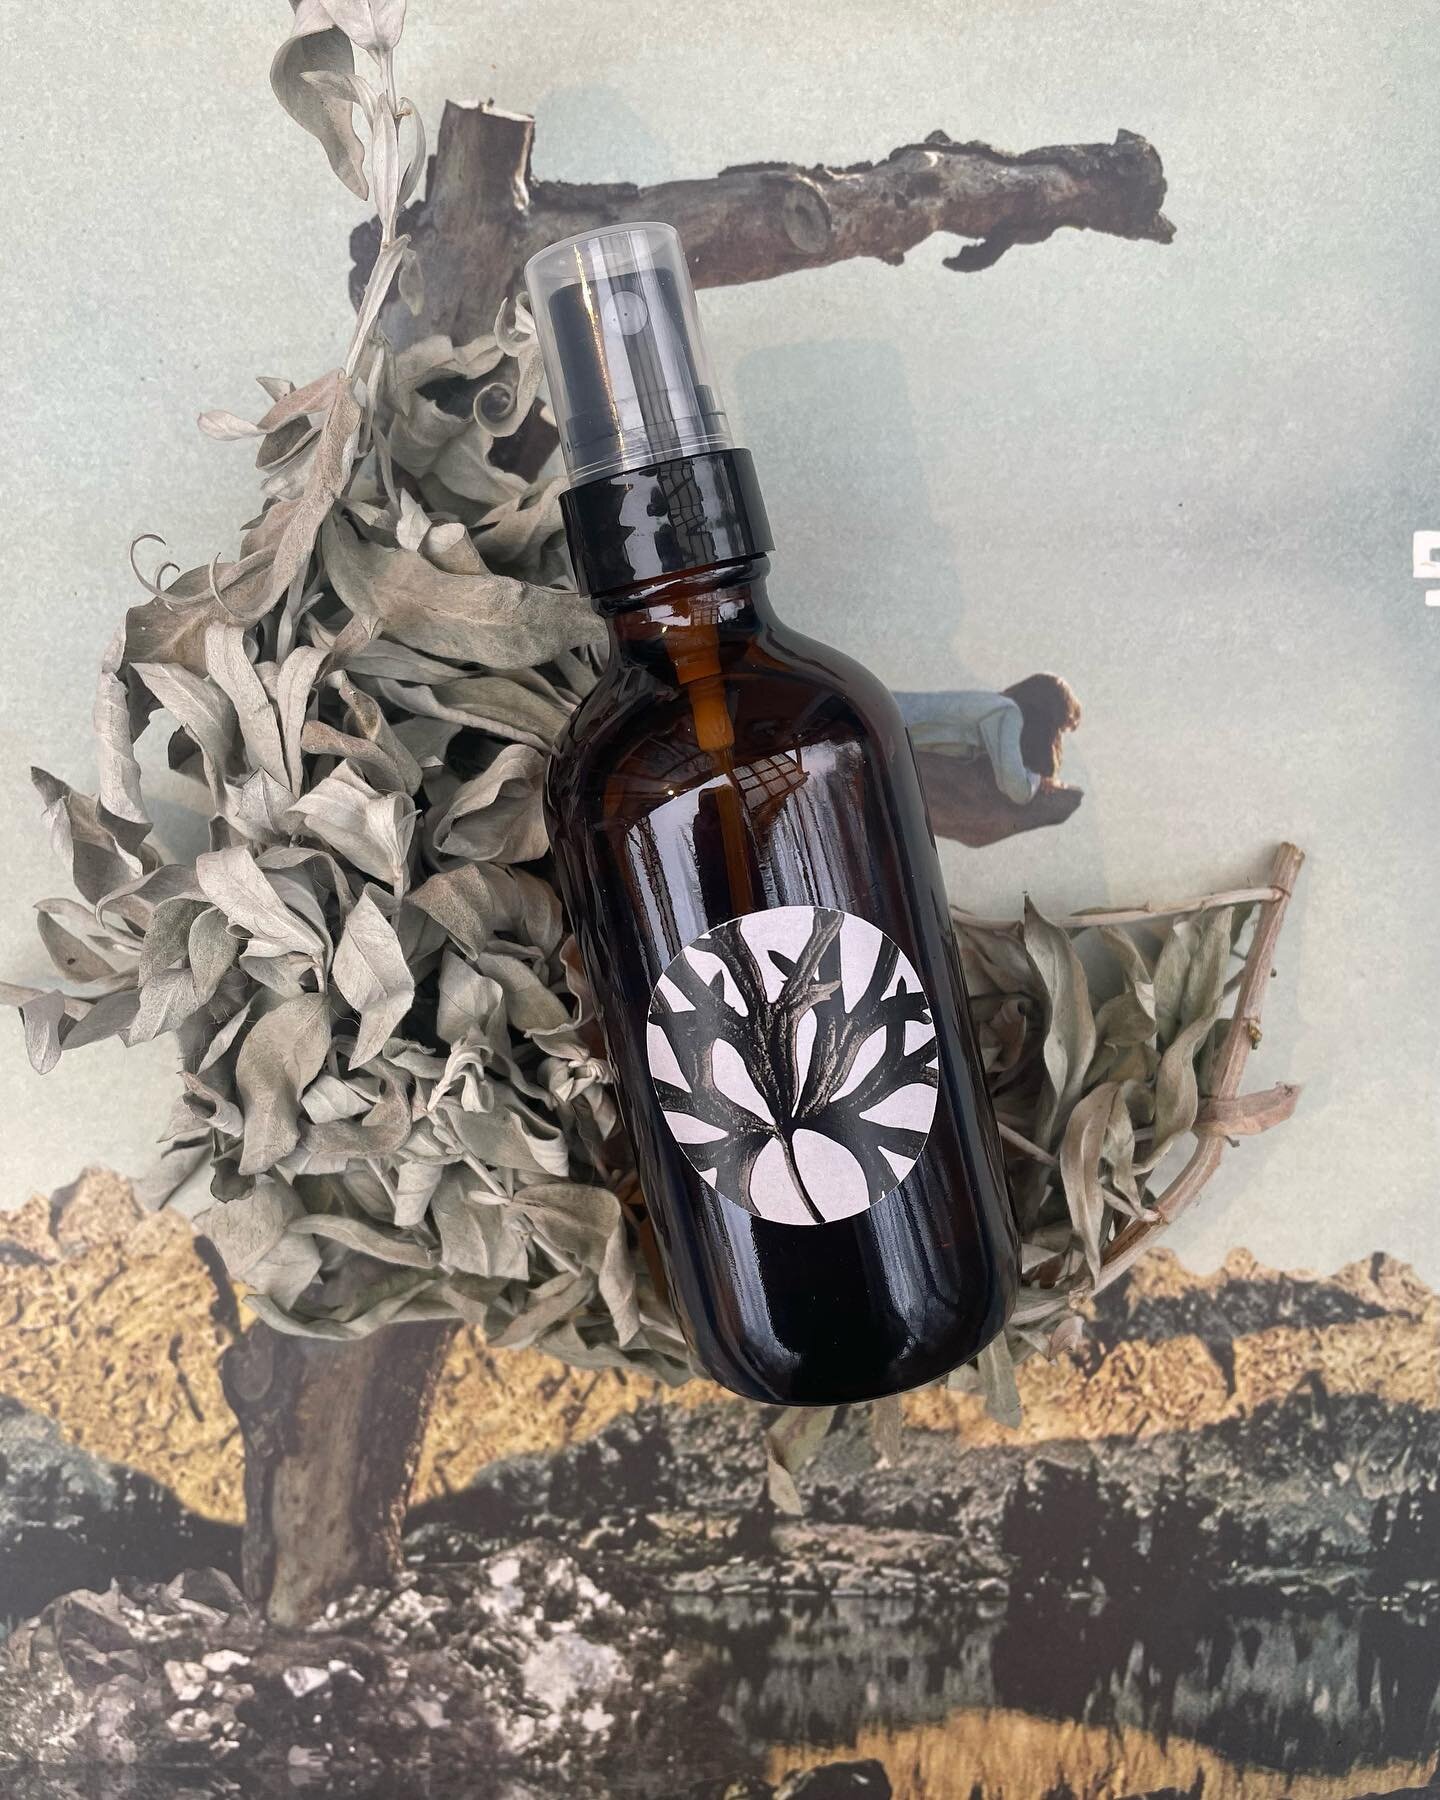 Artemisia Botanical Mist 🏹

Vulgarius ▪️ Ludoviciana ▪️
Annua ▪️ Princeps ▪️

We are still beaming from the full moon 🌕 and wanted to share about the artemisia mist we made for our Old Ways seasonal collection. 

It is an ally for deepening your co